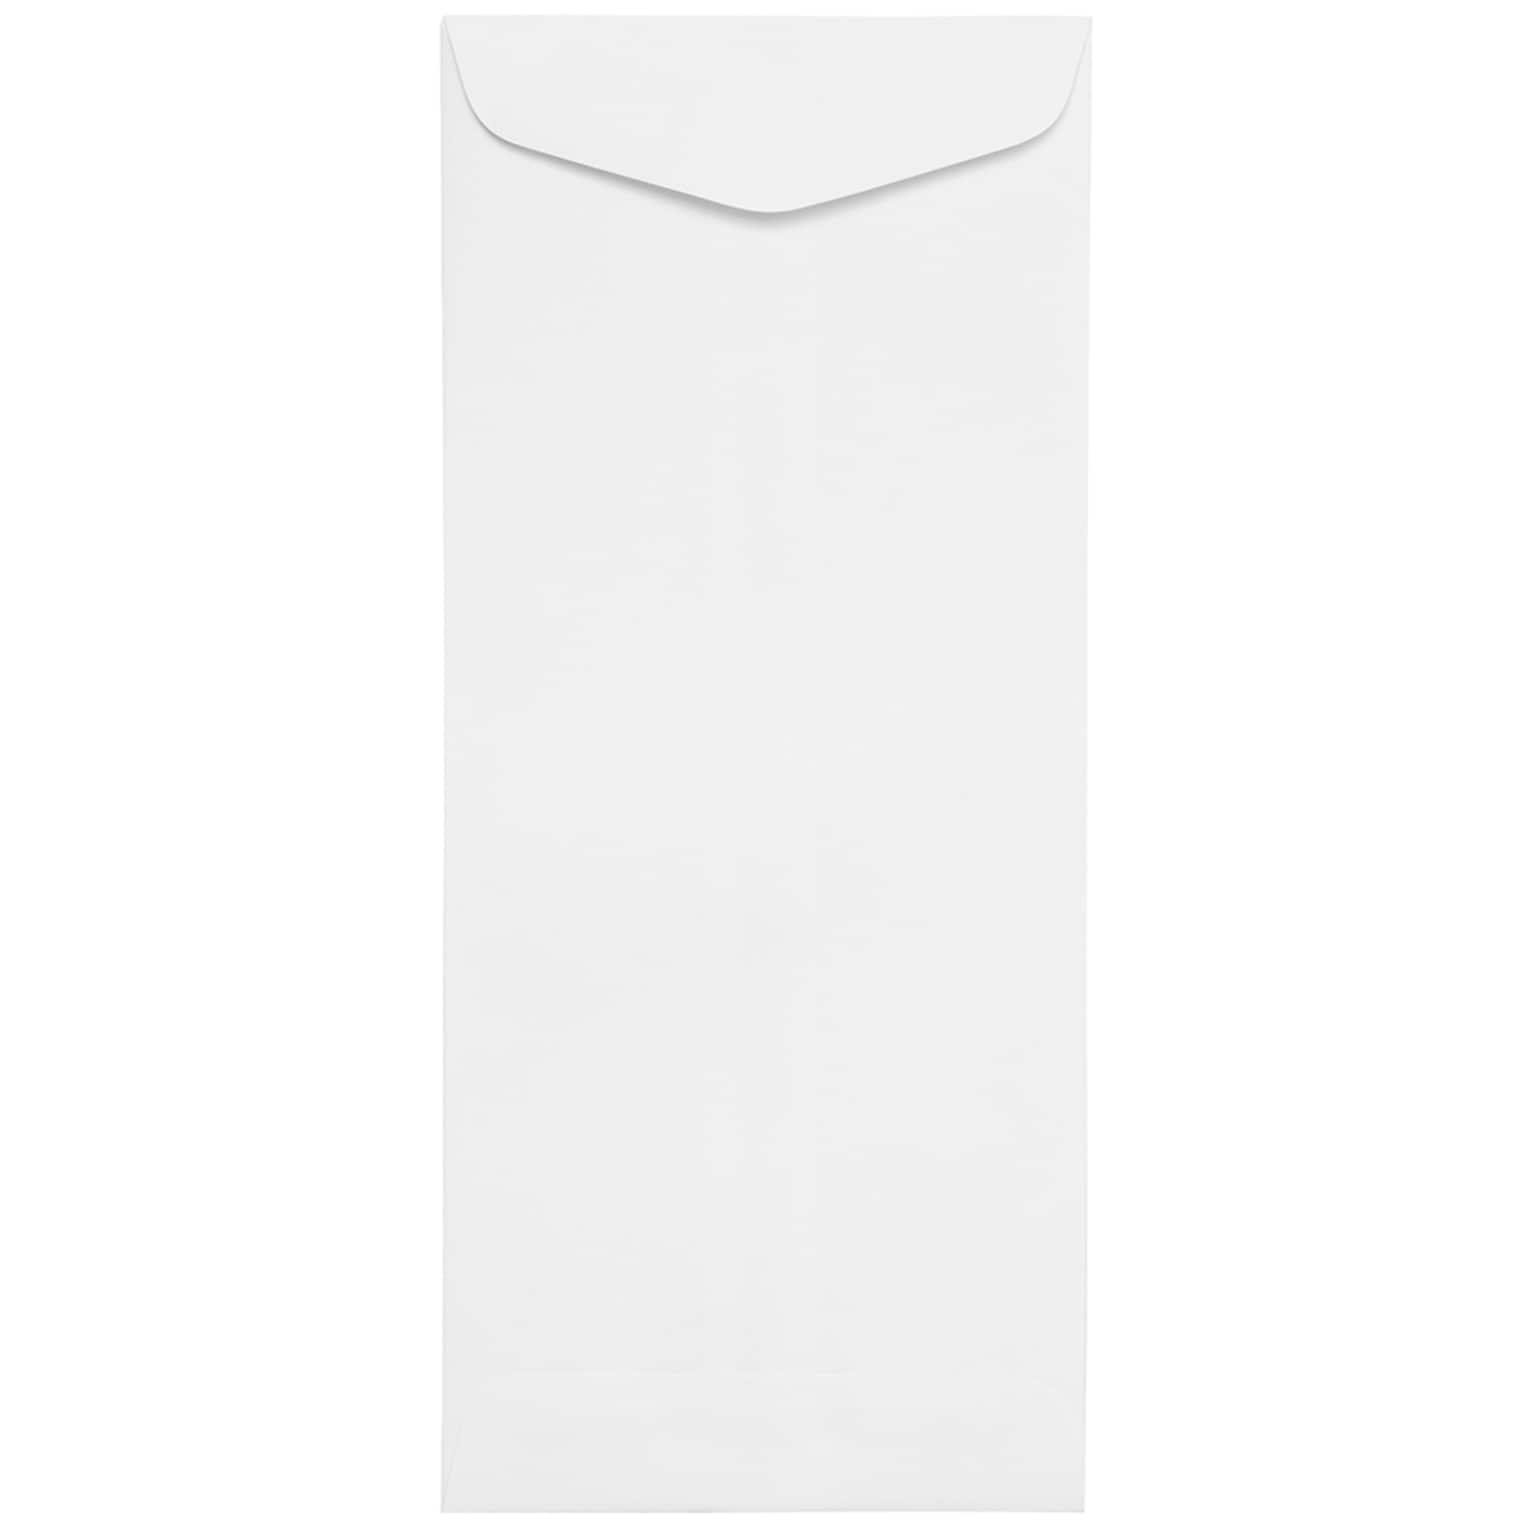 JAM Paper #14 Policy Business Commercial Envelope, 5 x 11 1/2, White, 500/Pack (1623189H)